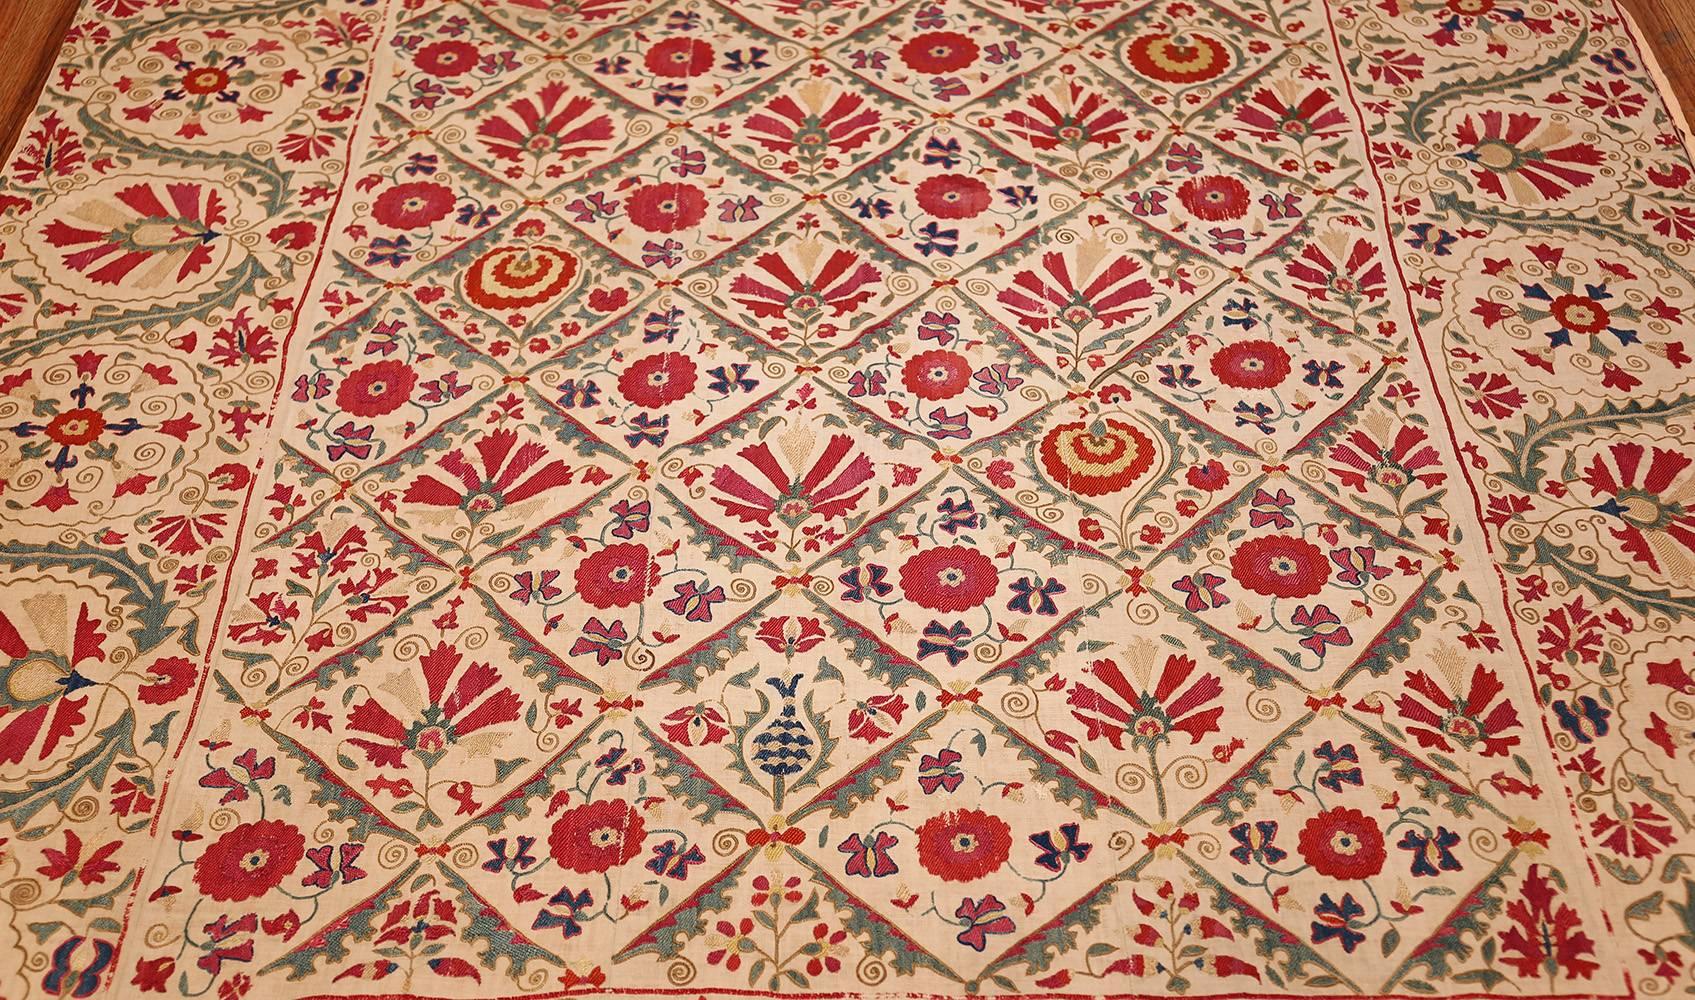 Early 19th Century Suzani Uzbek Textile. Size: 5 ft 4 in x 5 ft 7 in  4